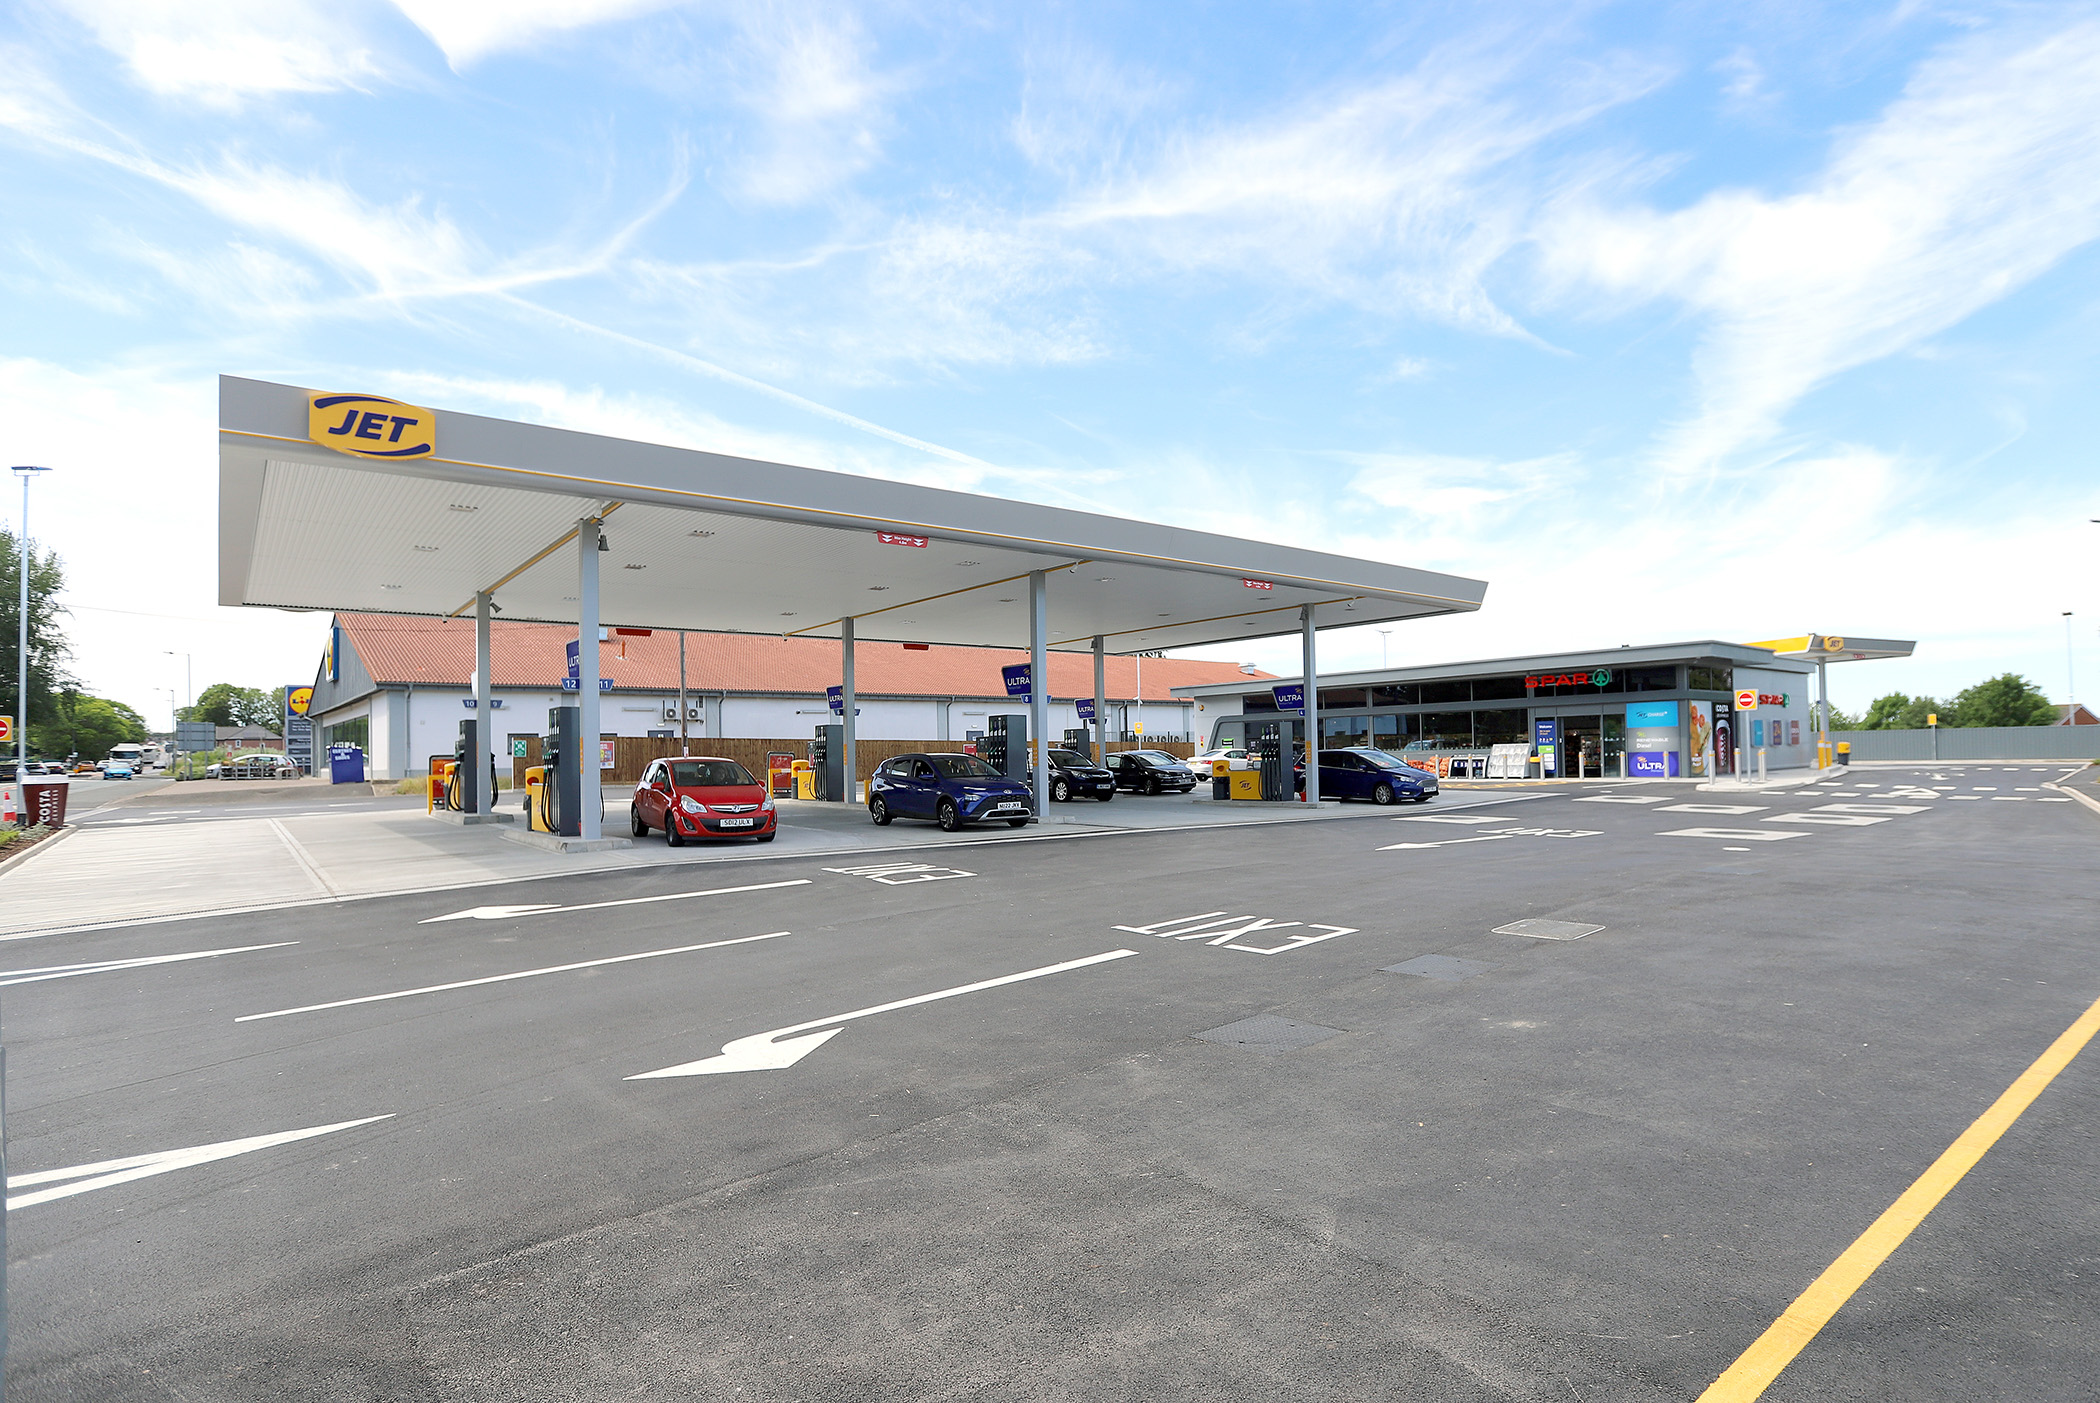 JET Beacon Garage re-opens with new SPAR following major transformation